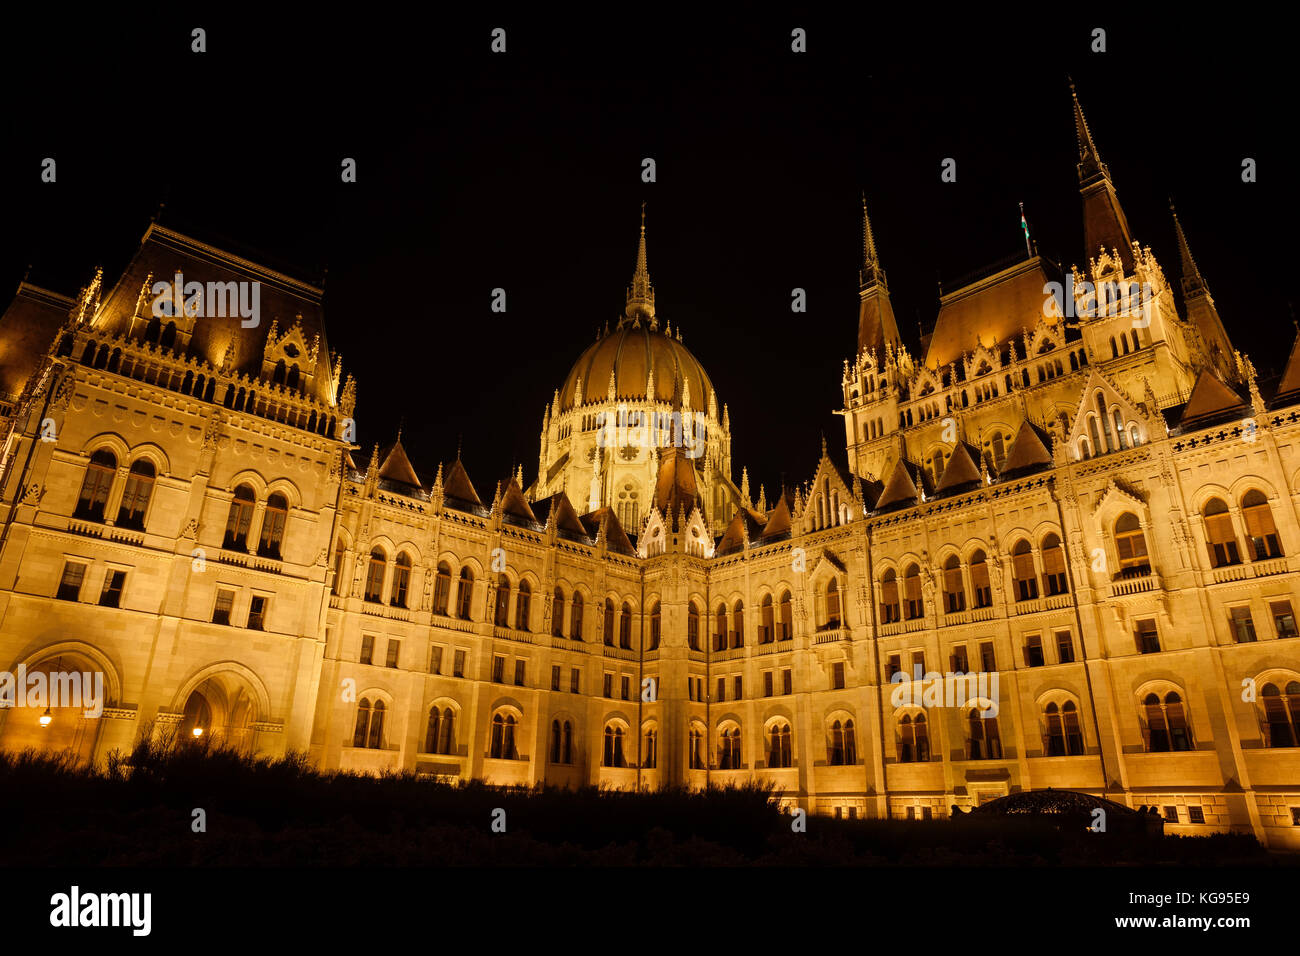 Hungary, Budapest, Hungarian Parliament Building (House of Parliament) illuminated at night, Gothic Revival style city landmark Stock Photo